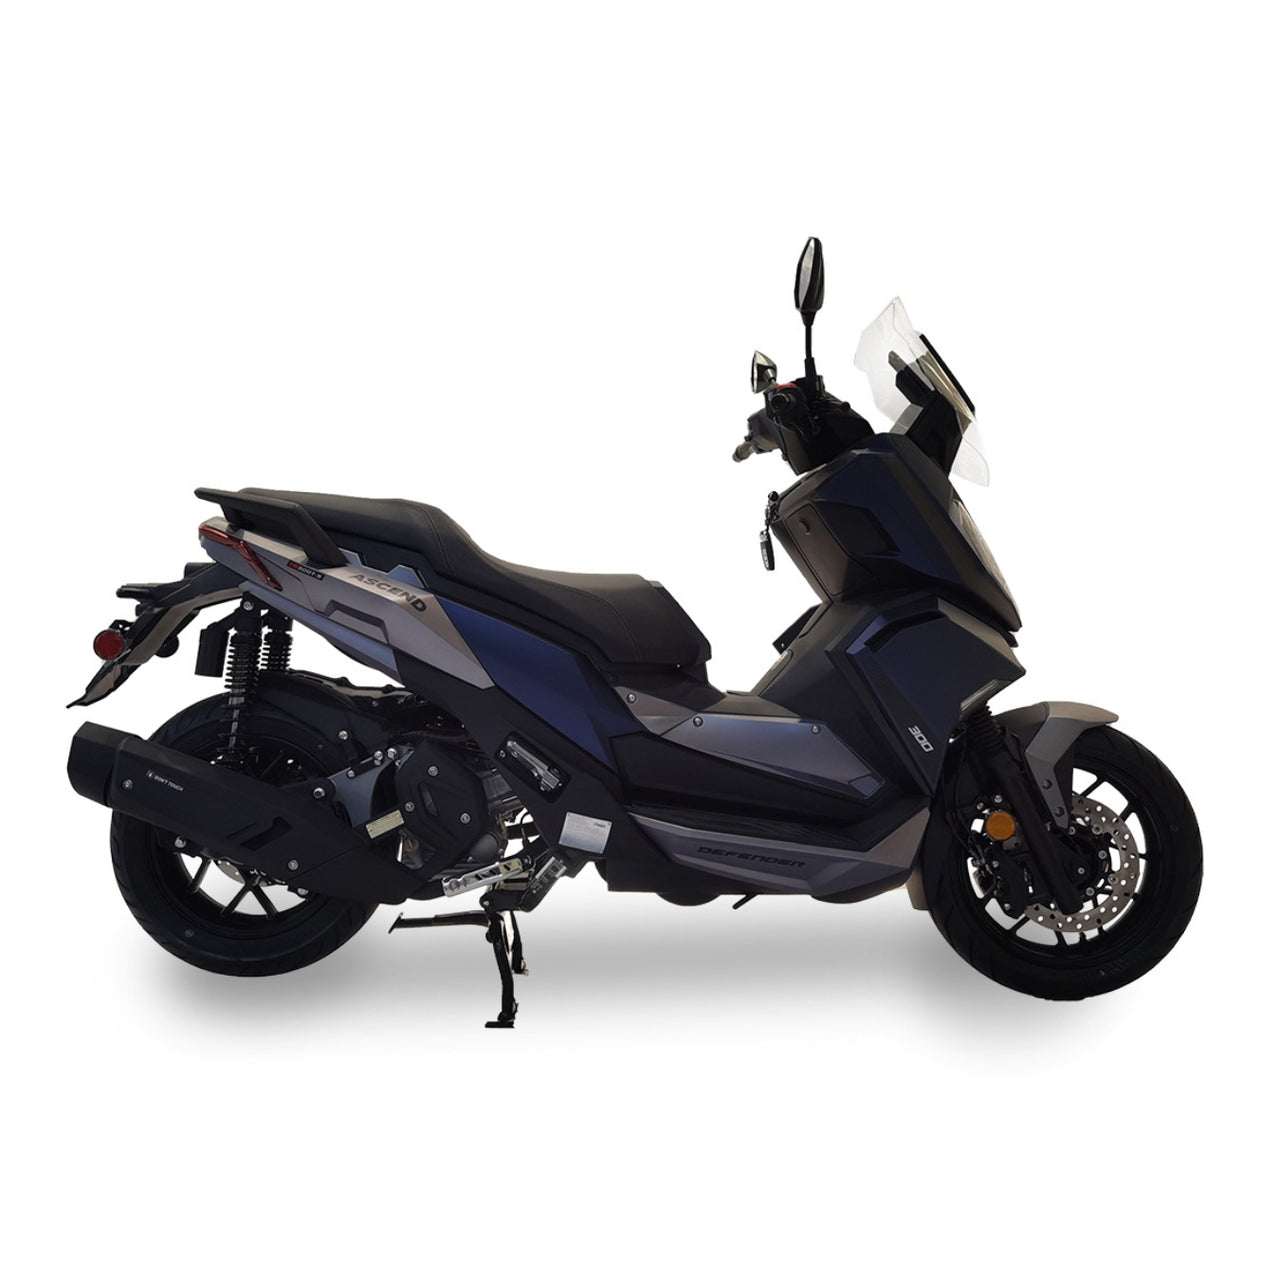 IceBear Ascend Defender 300cc Motorcycle